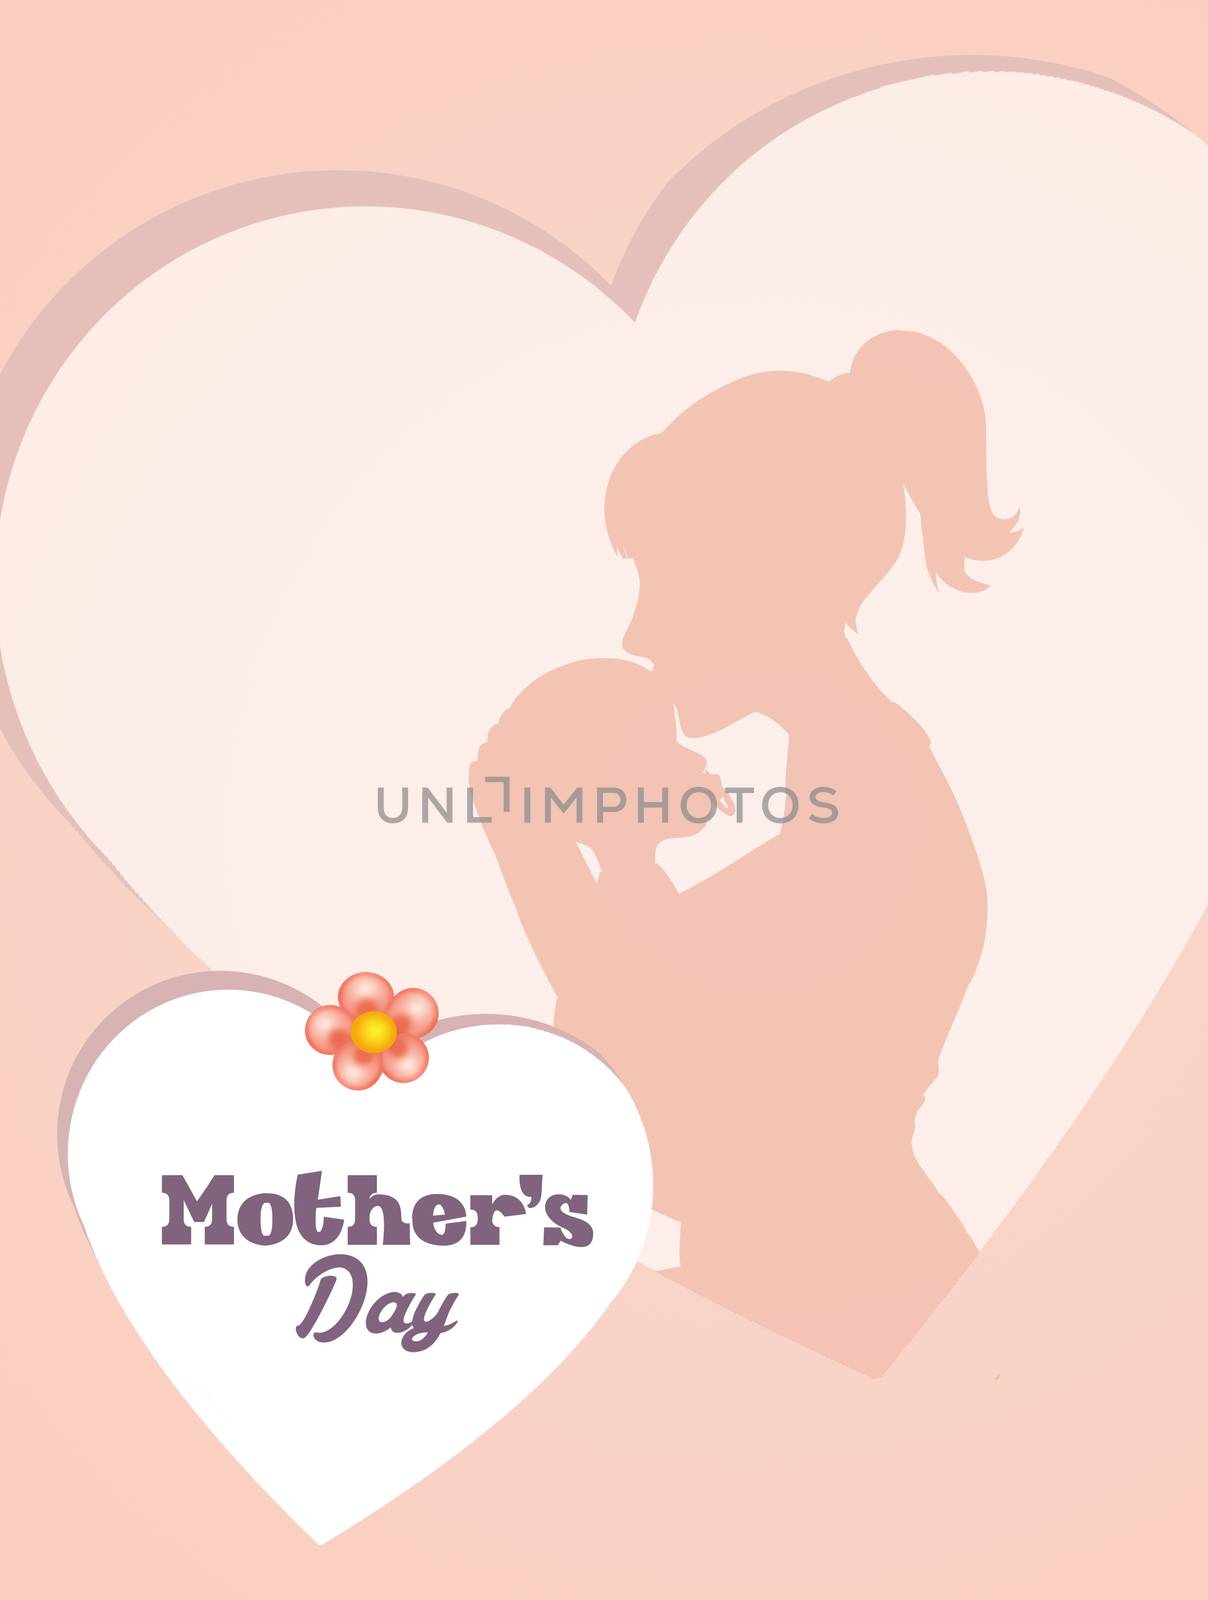 illustration of happy mother's day